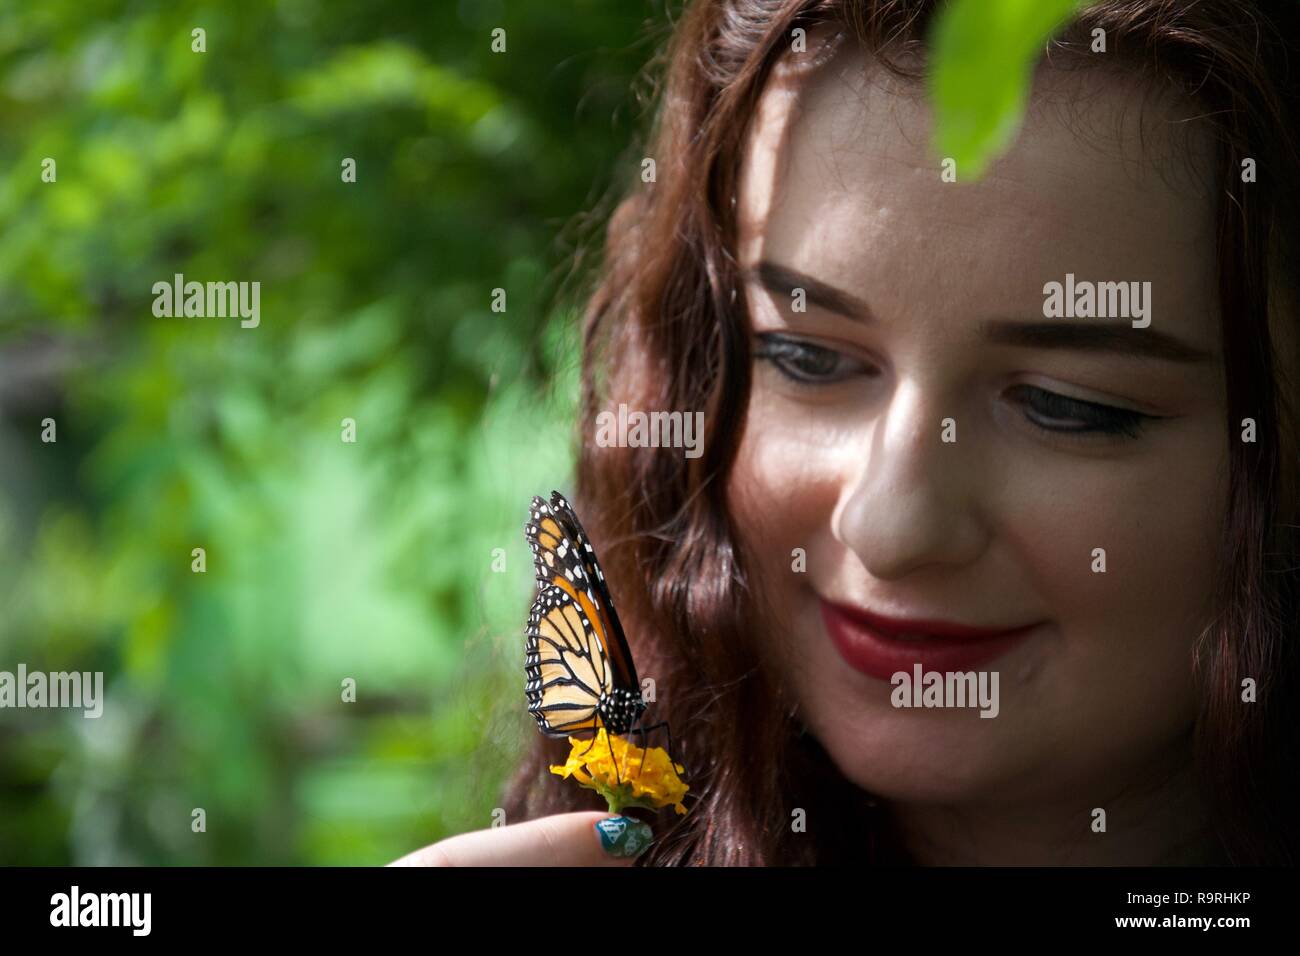 A happy young lady holds a flower near her face with an orange and black butterfly sitting on it with folded wings Stock Photo